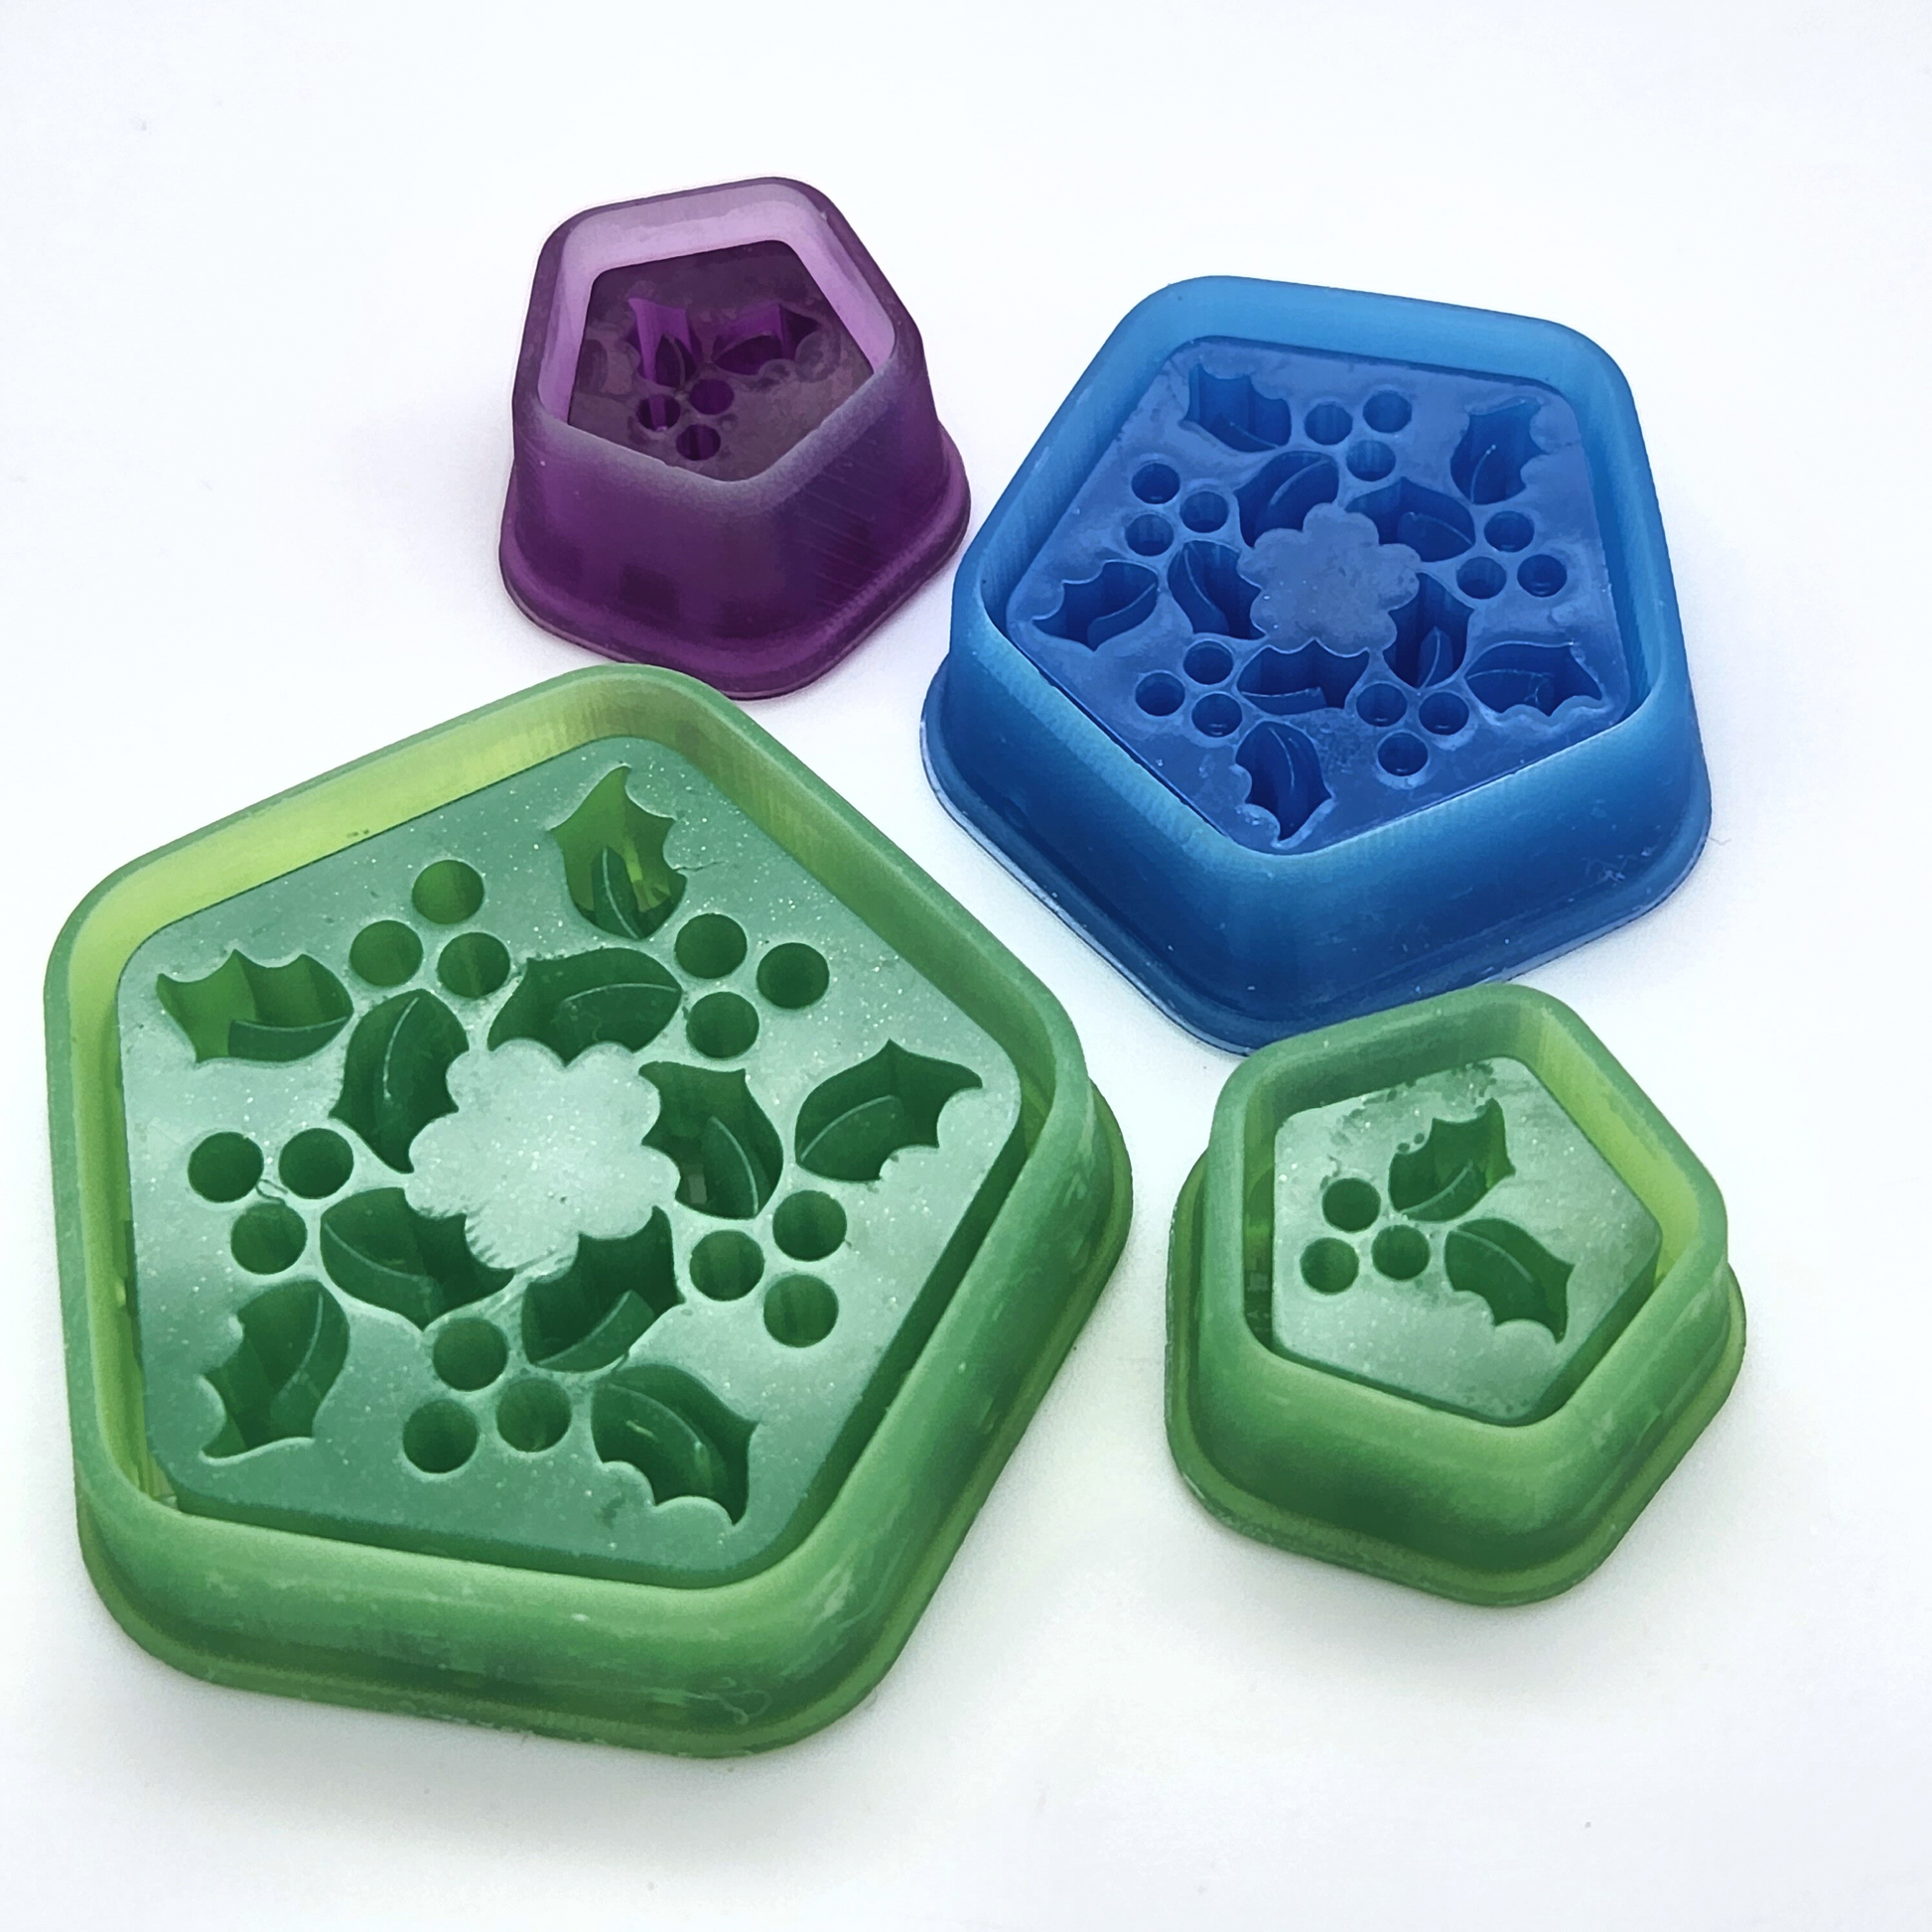 3D Printed Resin Winter Christmas Holly Tile Design Sharp Edge Polymer Clay Cutter Set